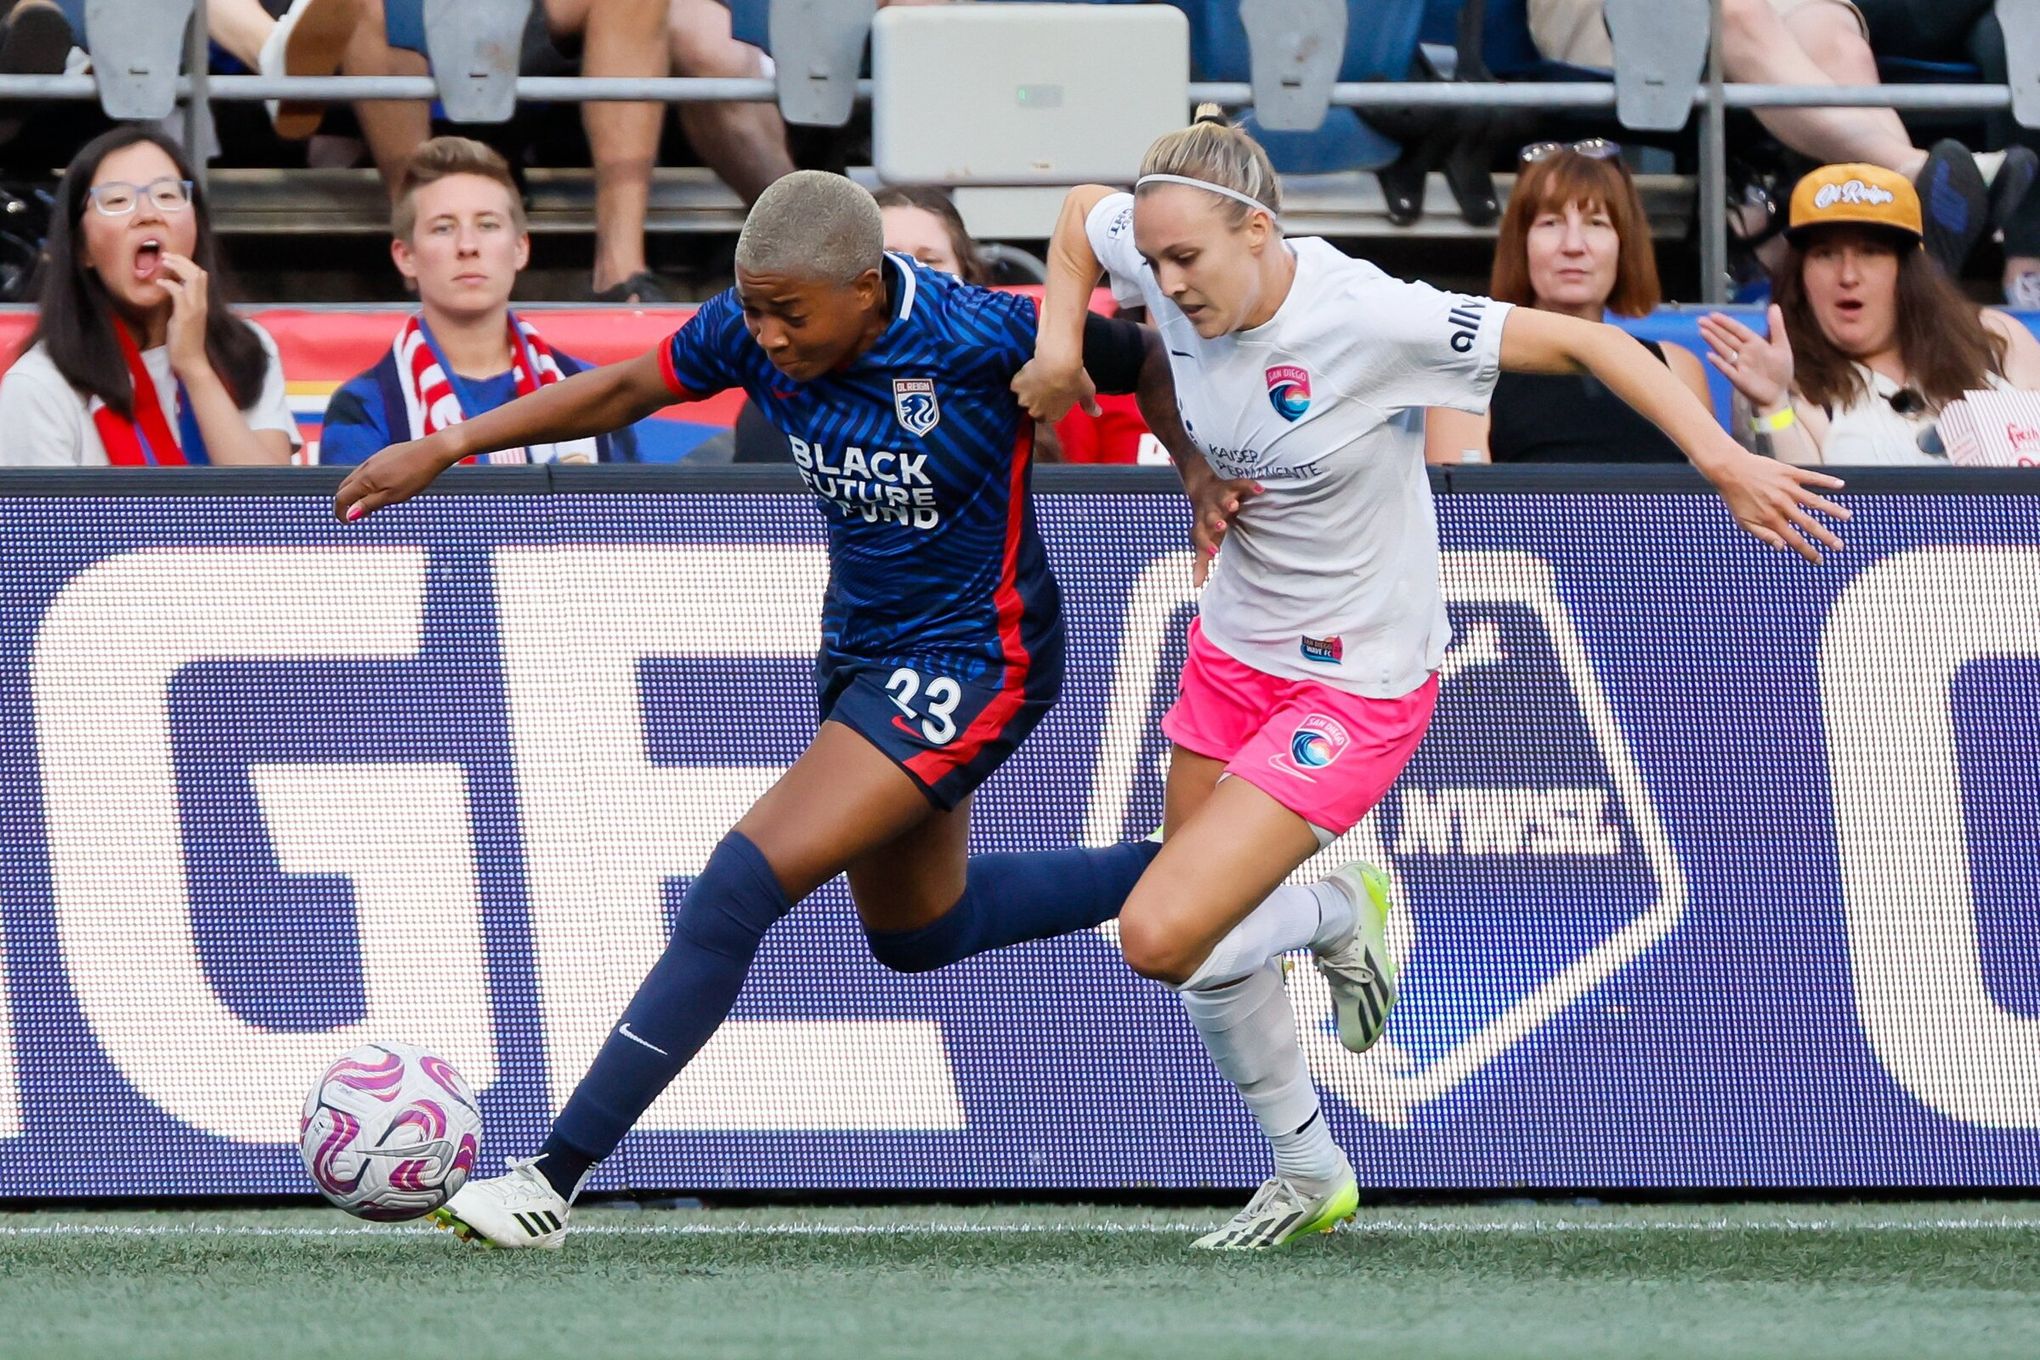 OL Reign-Dash glance: Shorthanded Reign kick off road trip at